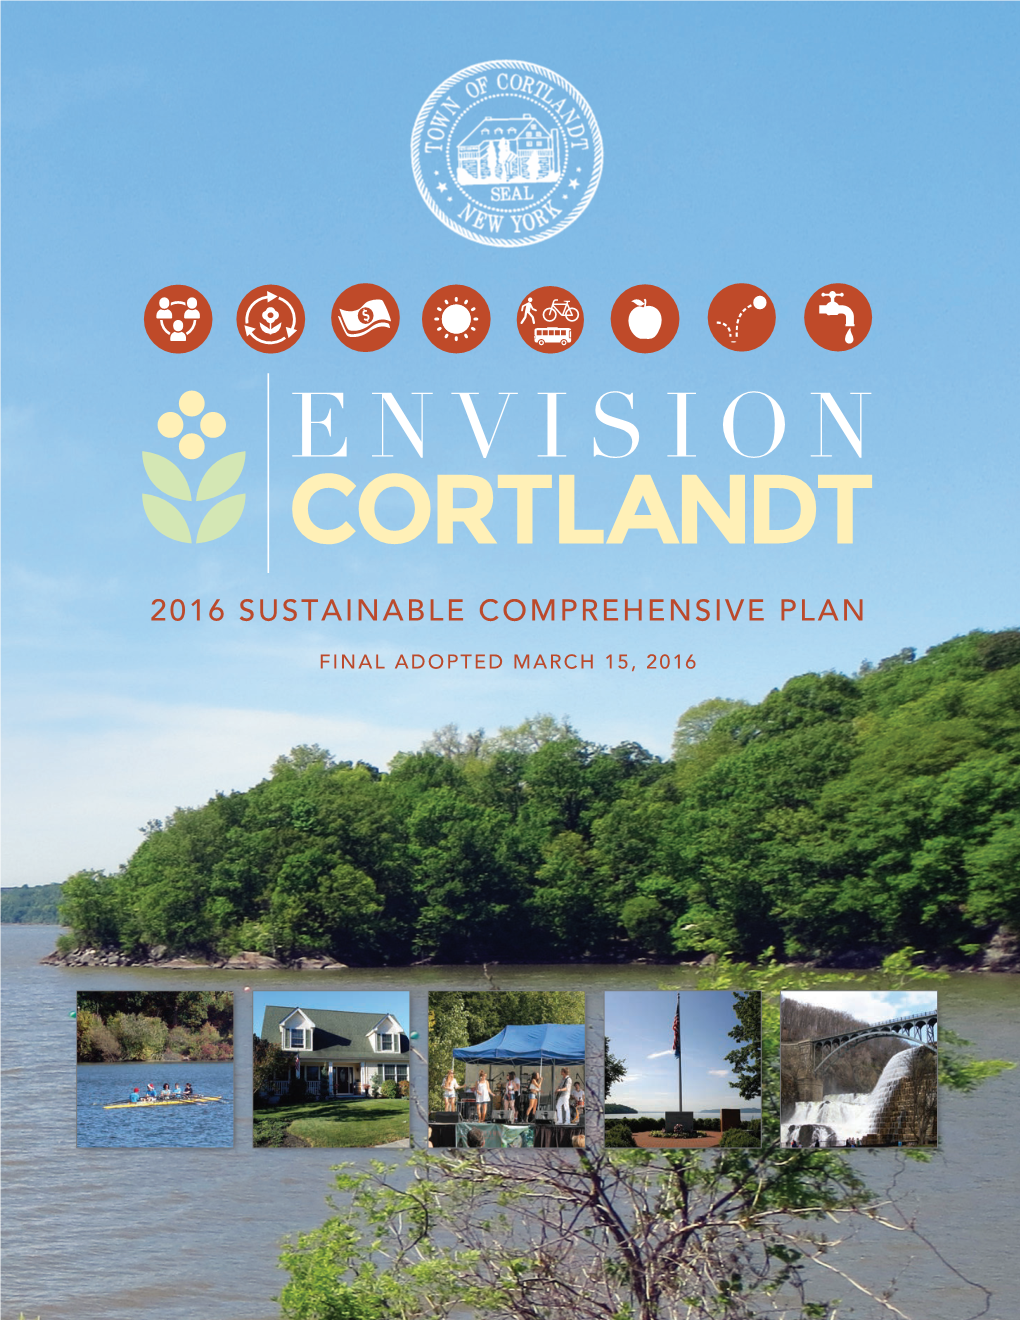 The 2016 Sustainable Comprehensive Plan Adopted